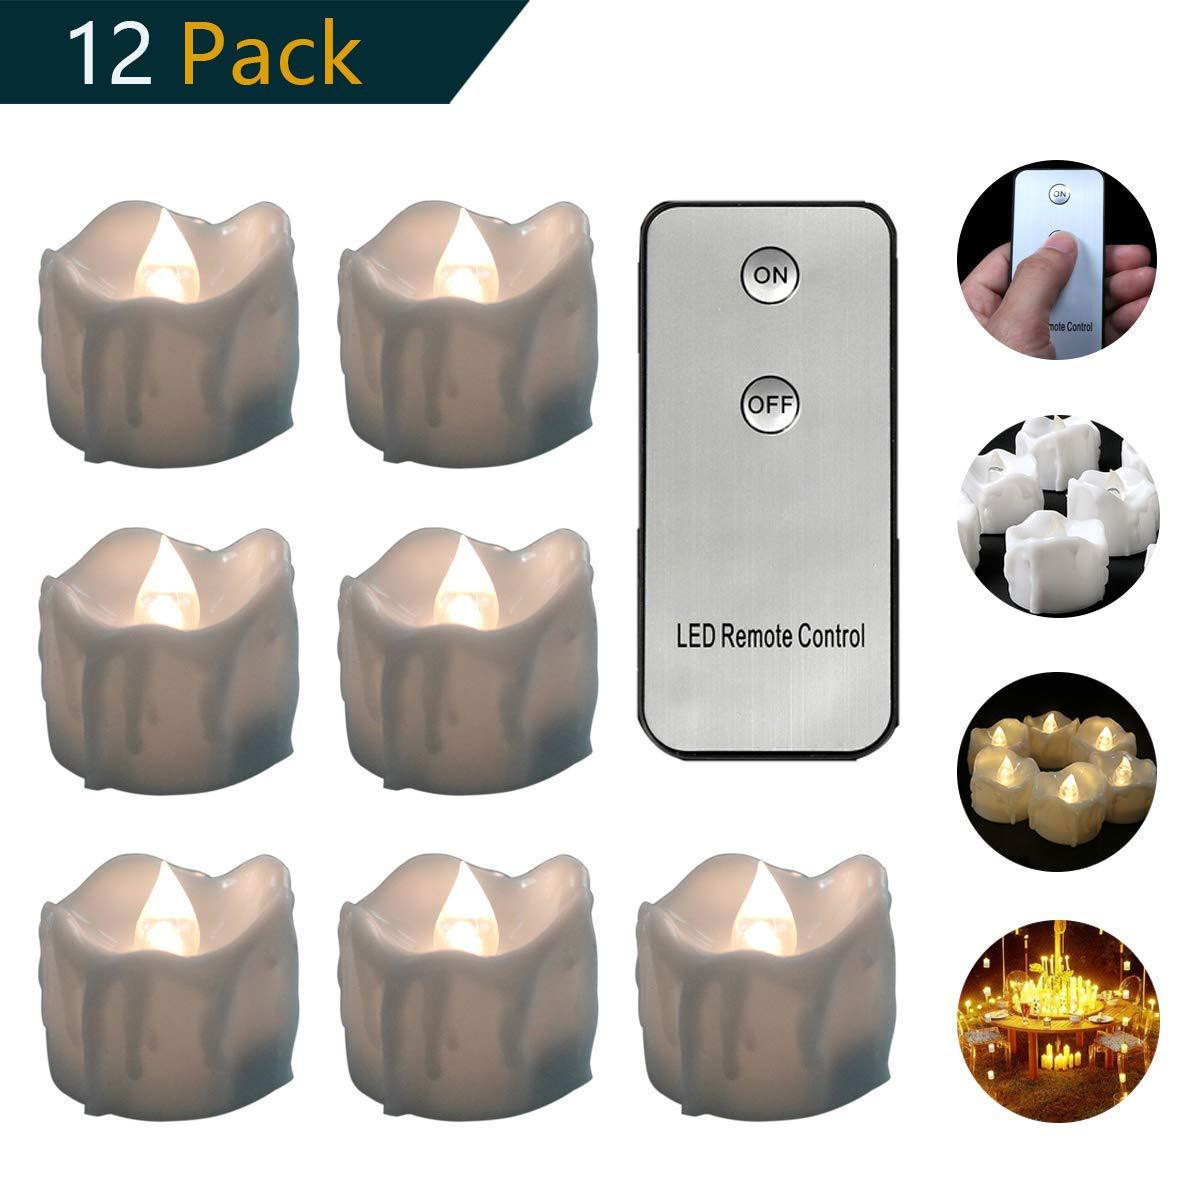 12PCS-LED-Flickering-Candle-Tea-Light-With-Remote-Control-for-Home-Garden-Balcony-Decor-1557823-2